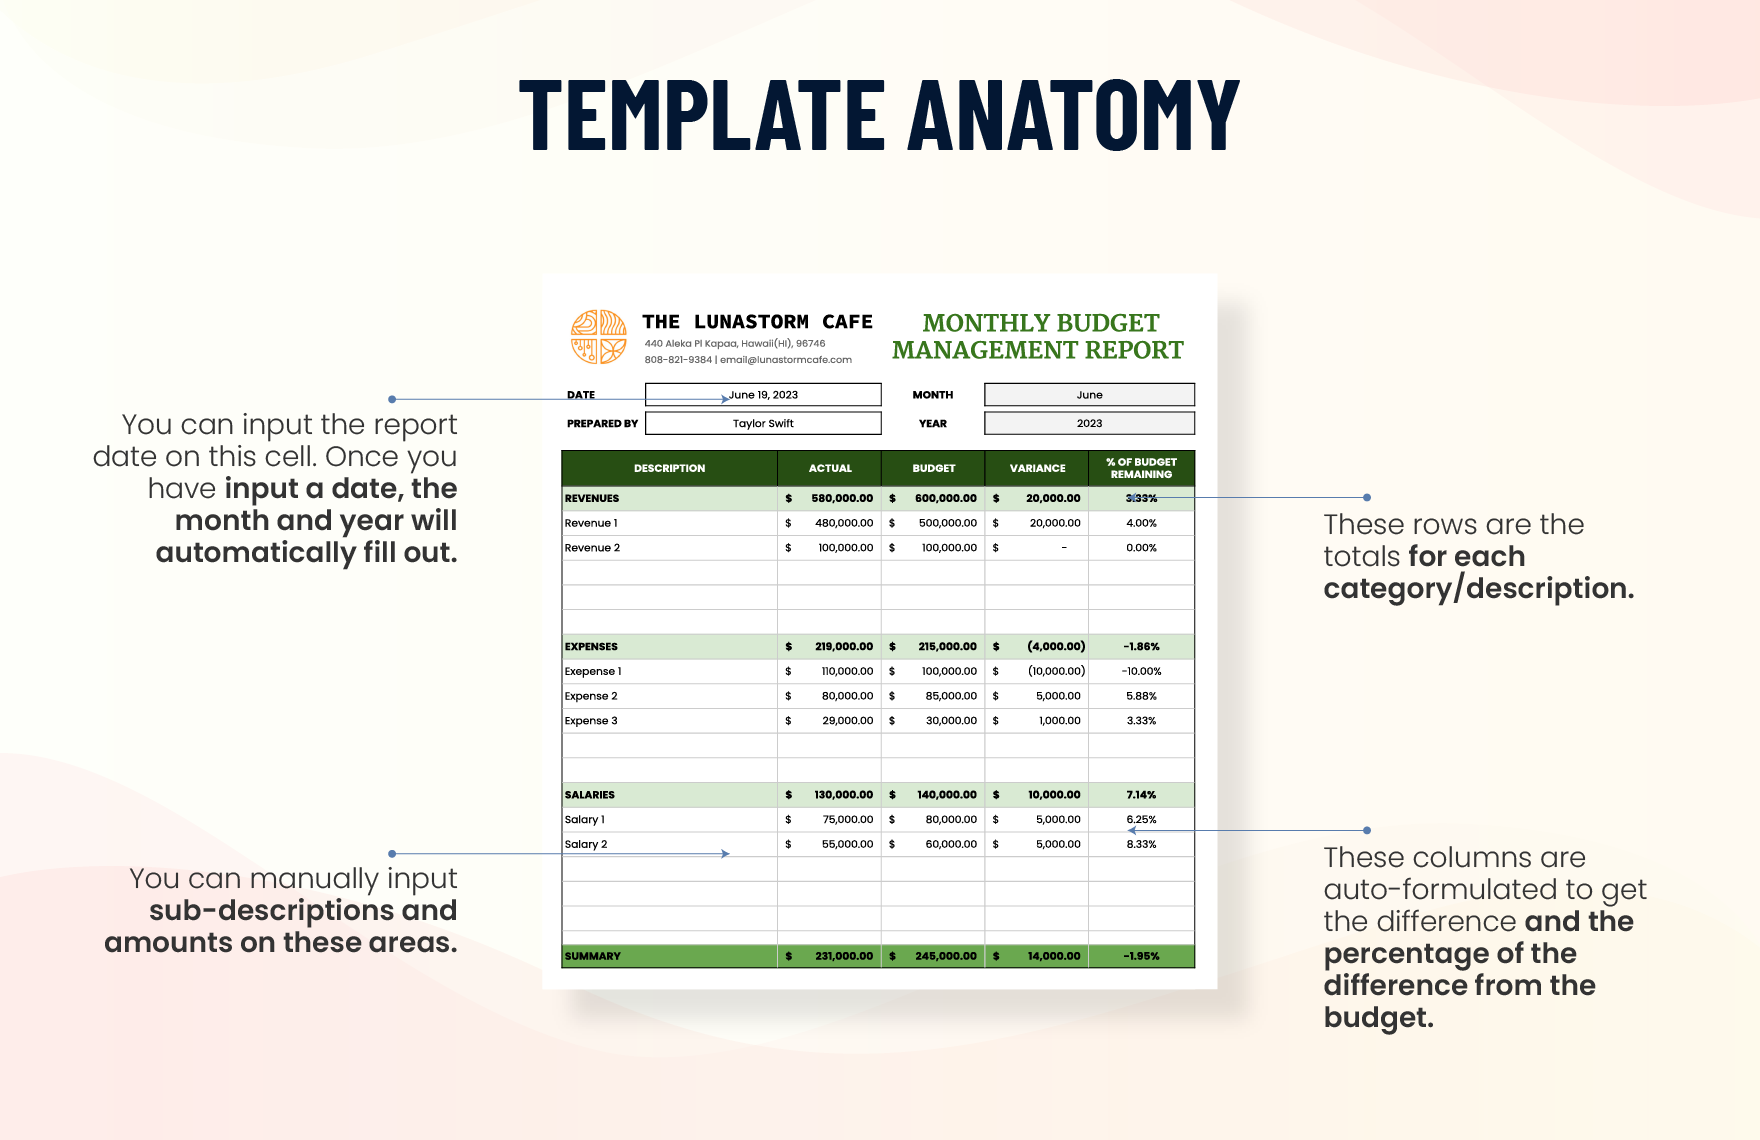 Monthly Budget Management Report Template